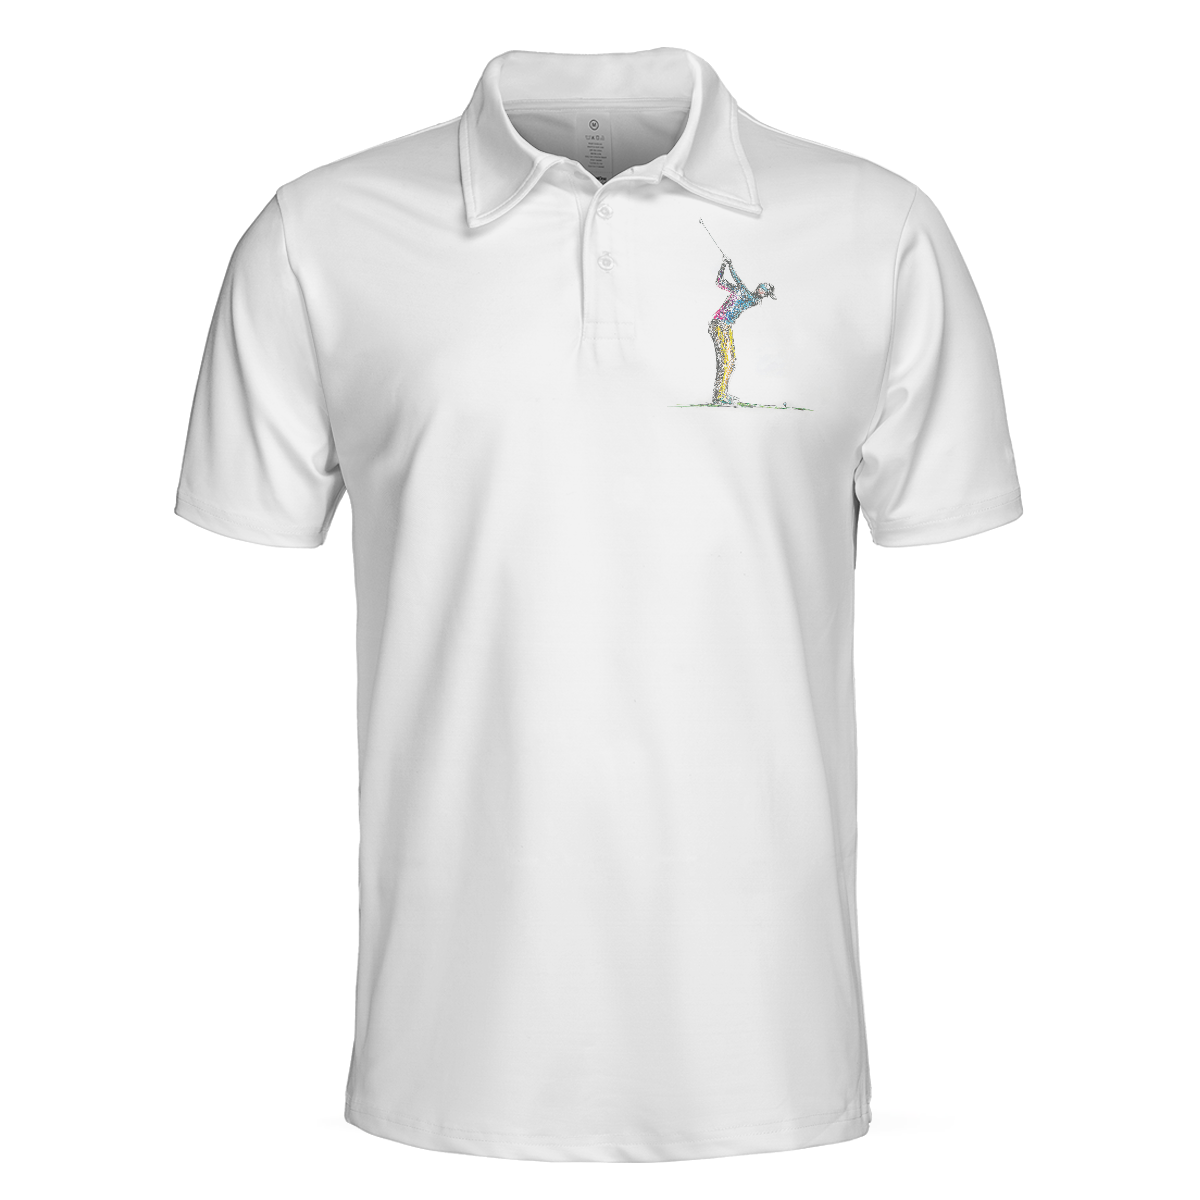 Things My Dad Love Golfing And Bourbon Whiskey Golf Polo Shirt White Drinking Golfer Polo Shirt For Men - 3